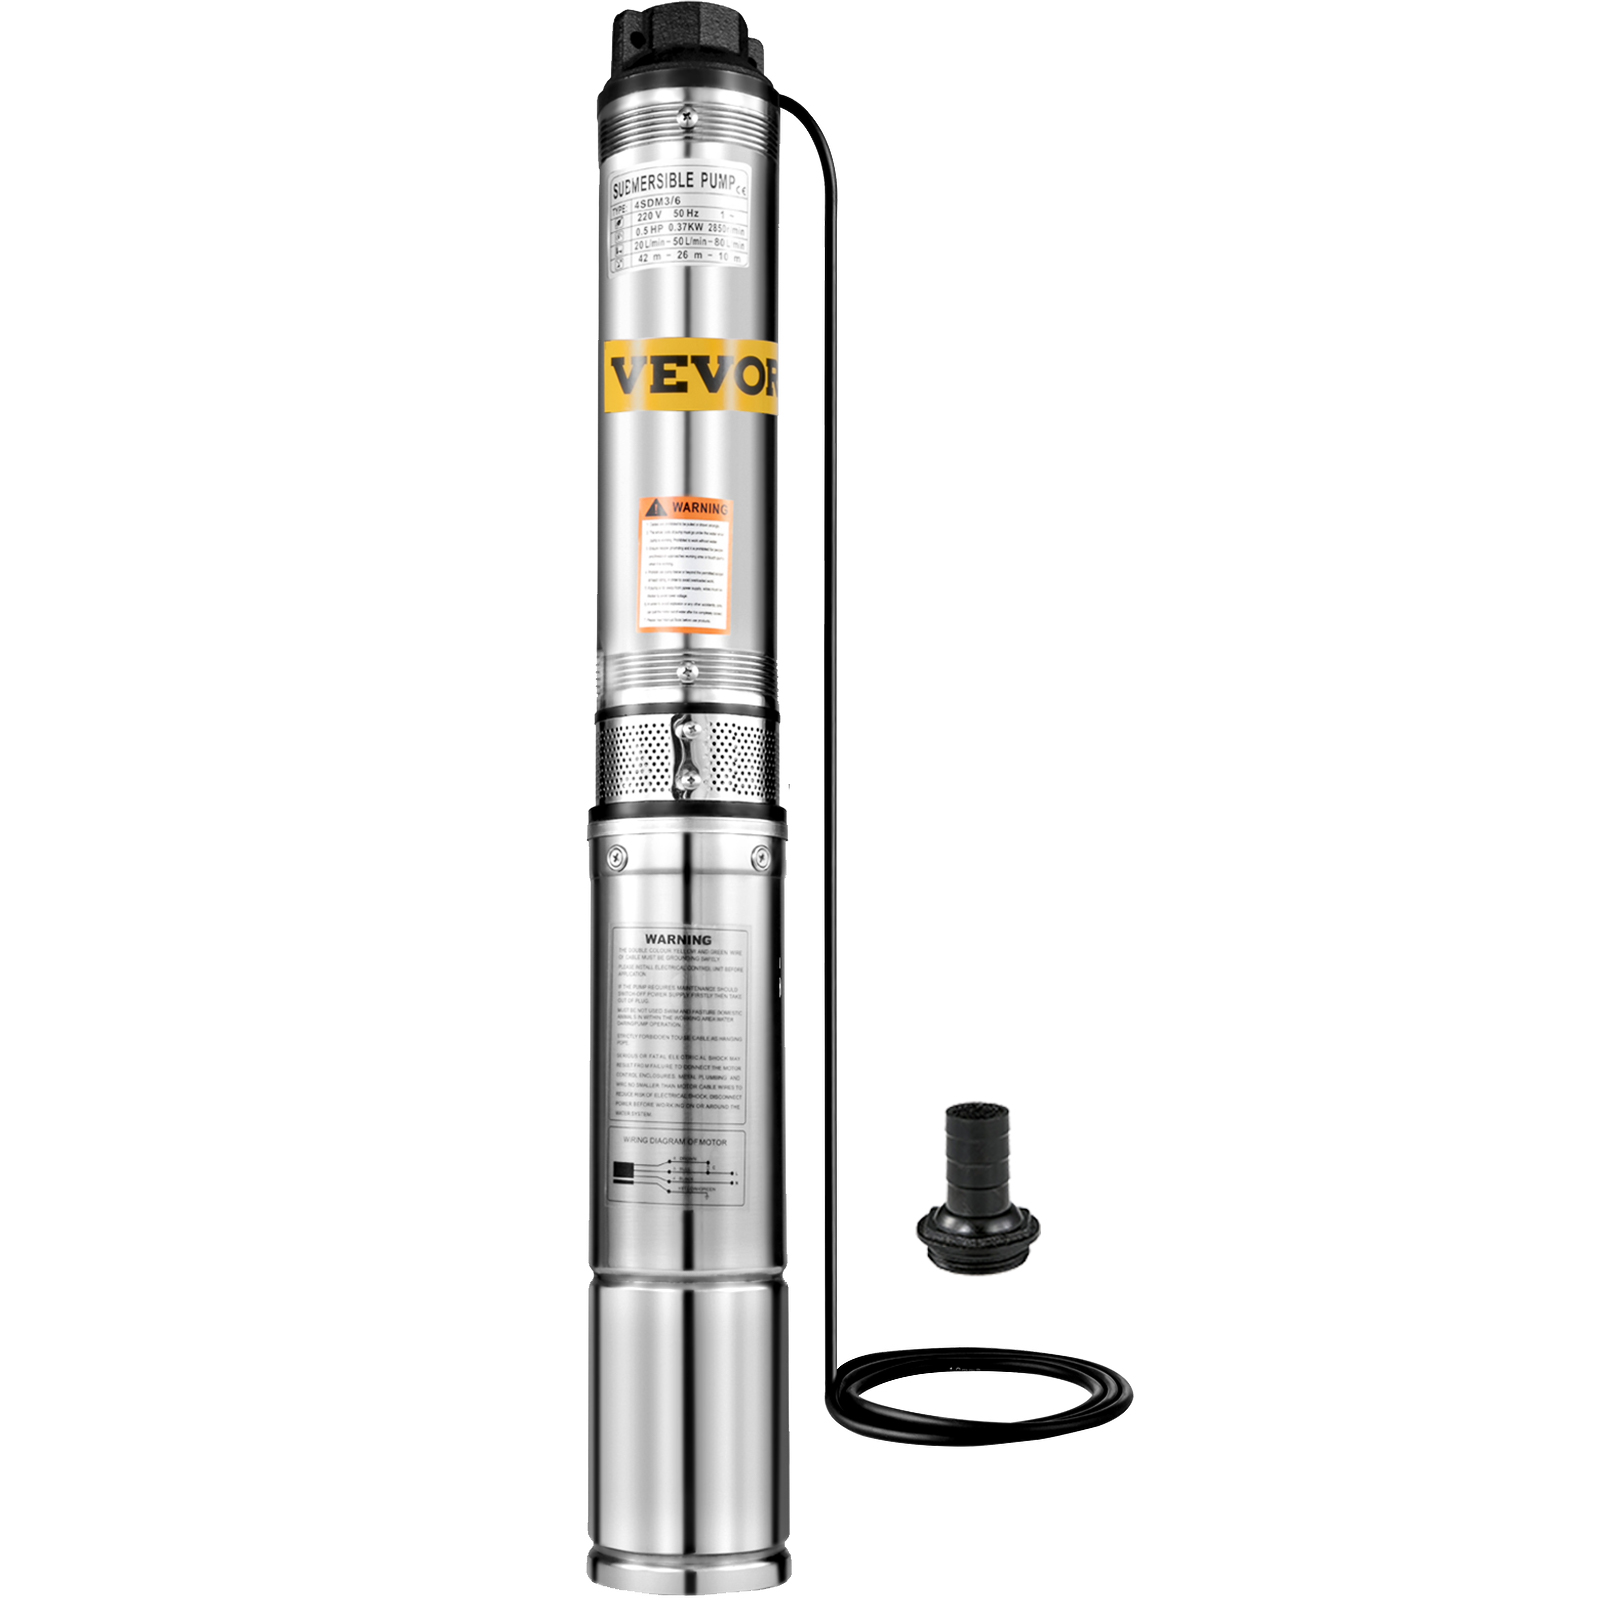 0.5 HP STAINLESS STEEL SUBMERSIBLE DEEP WELL PUMP UNDER WATER 5 FT 240V 